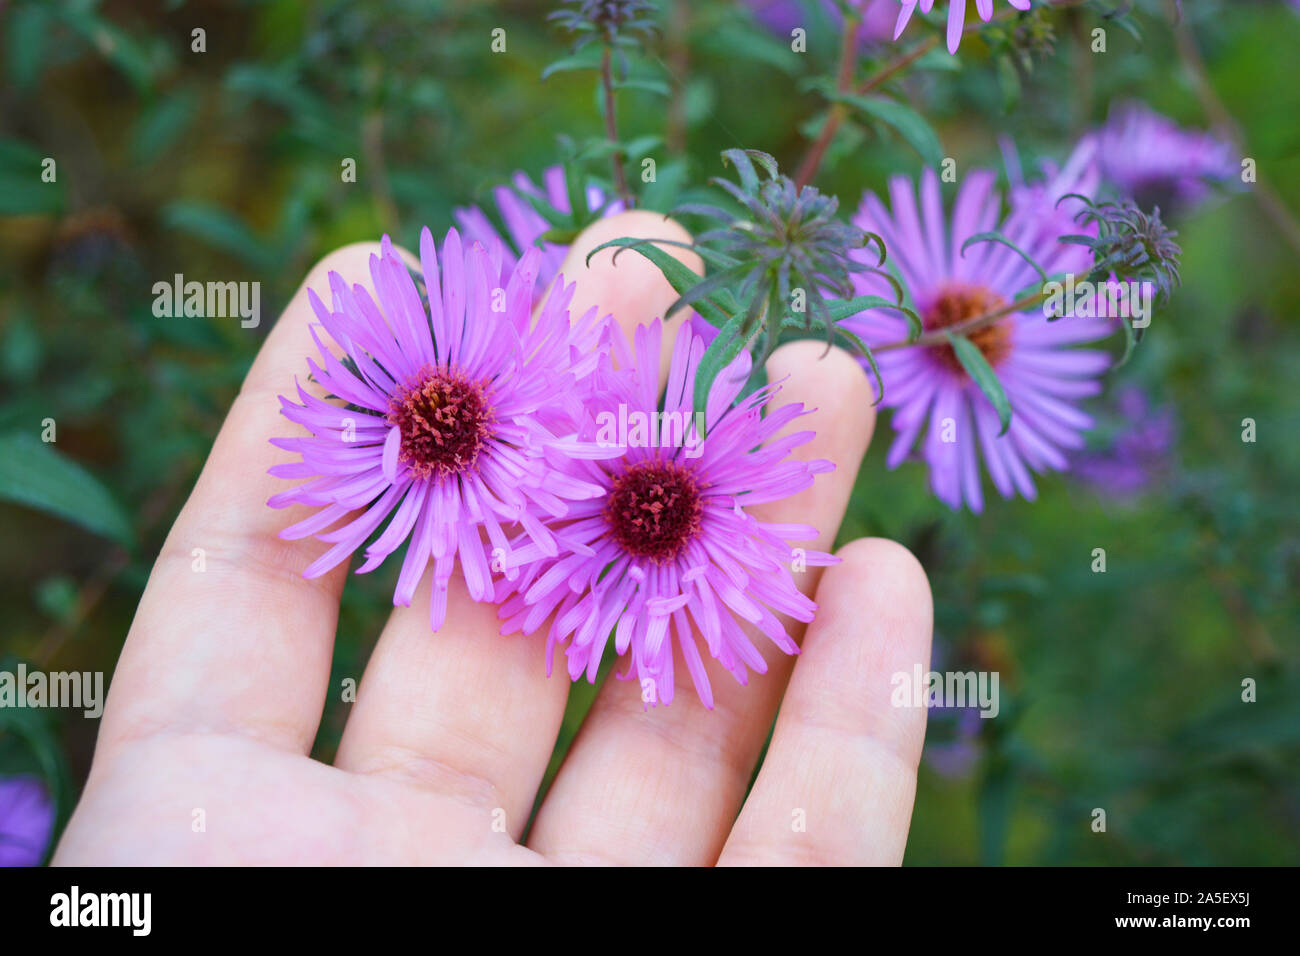 Bright and colorful bush with large purple flowers, Symphyotrichum novi-belgii, New York aster in a female hand. Stock Photo